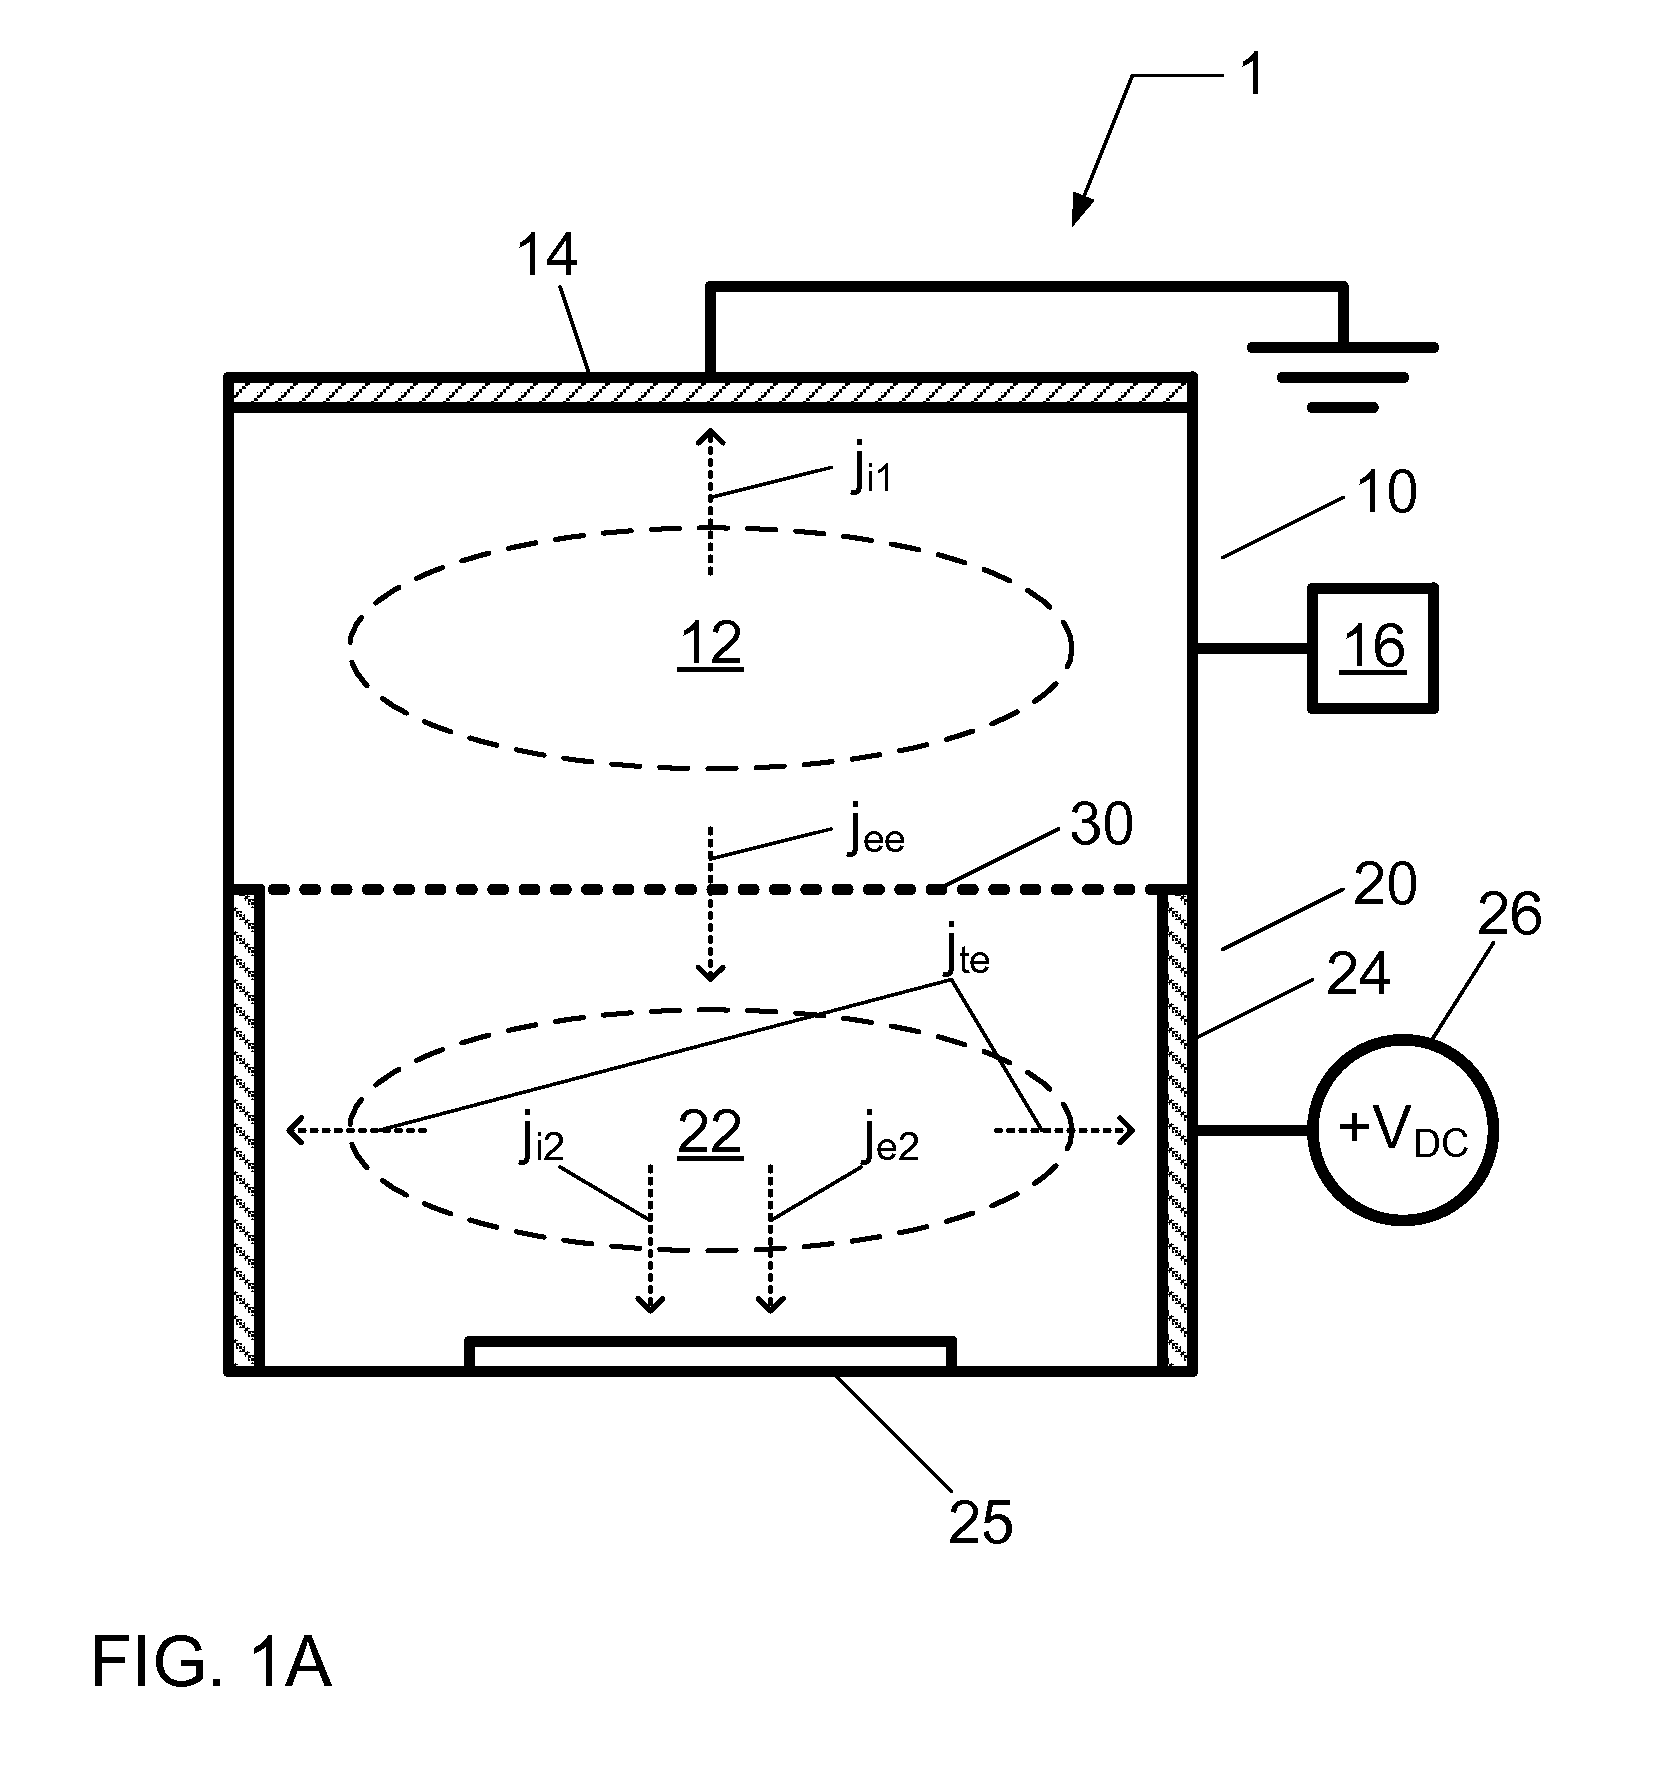 Mono-energetic neutral beam activated chemical processing system and method of using